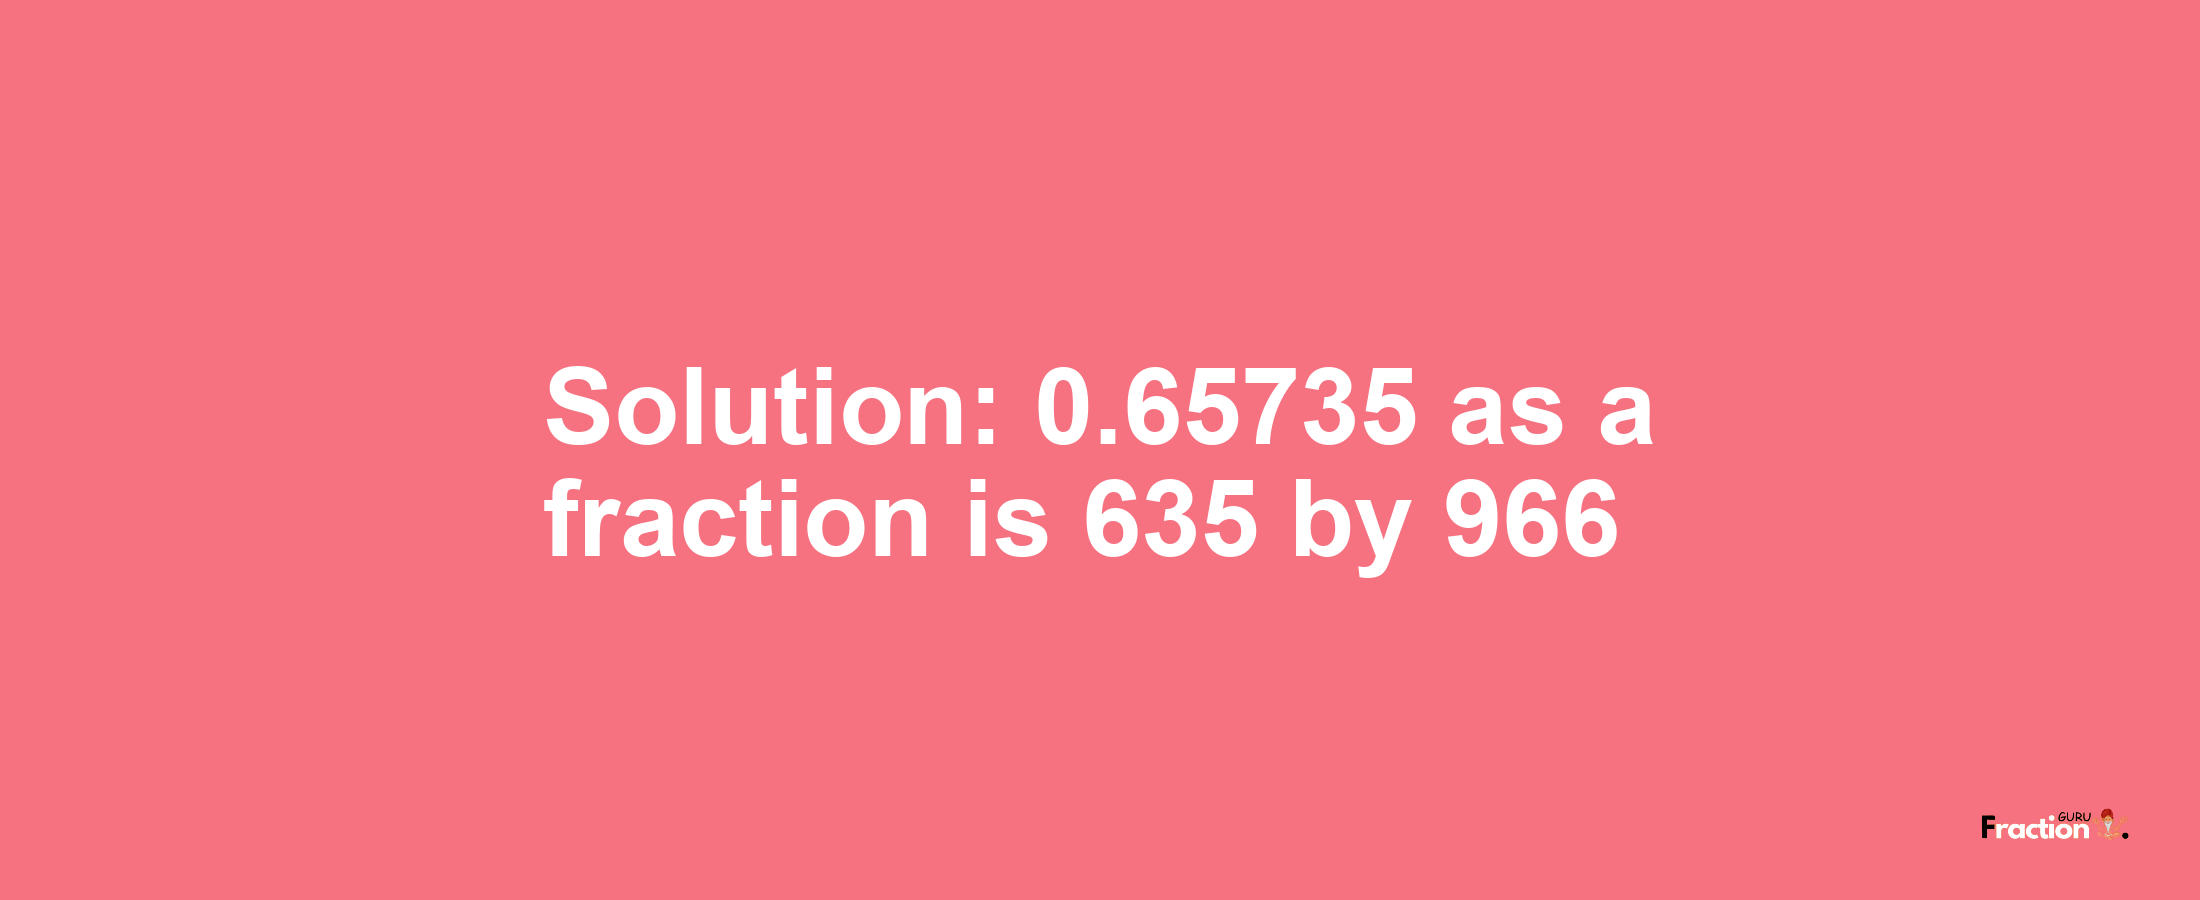 Solution:0.65735 as a fraction is 635/966